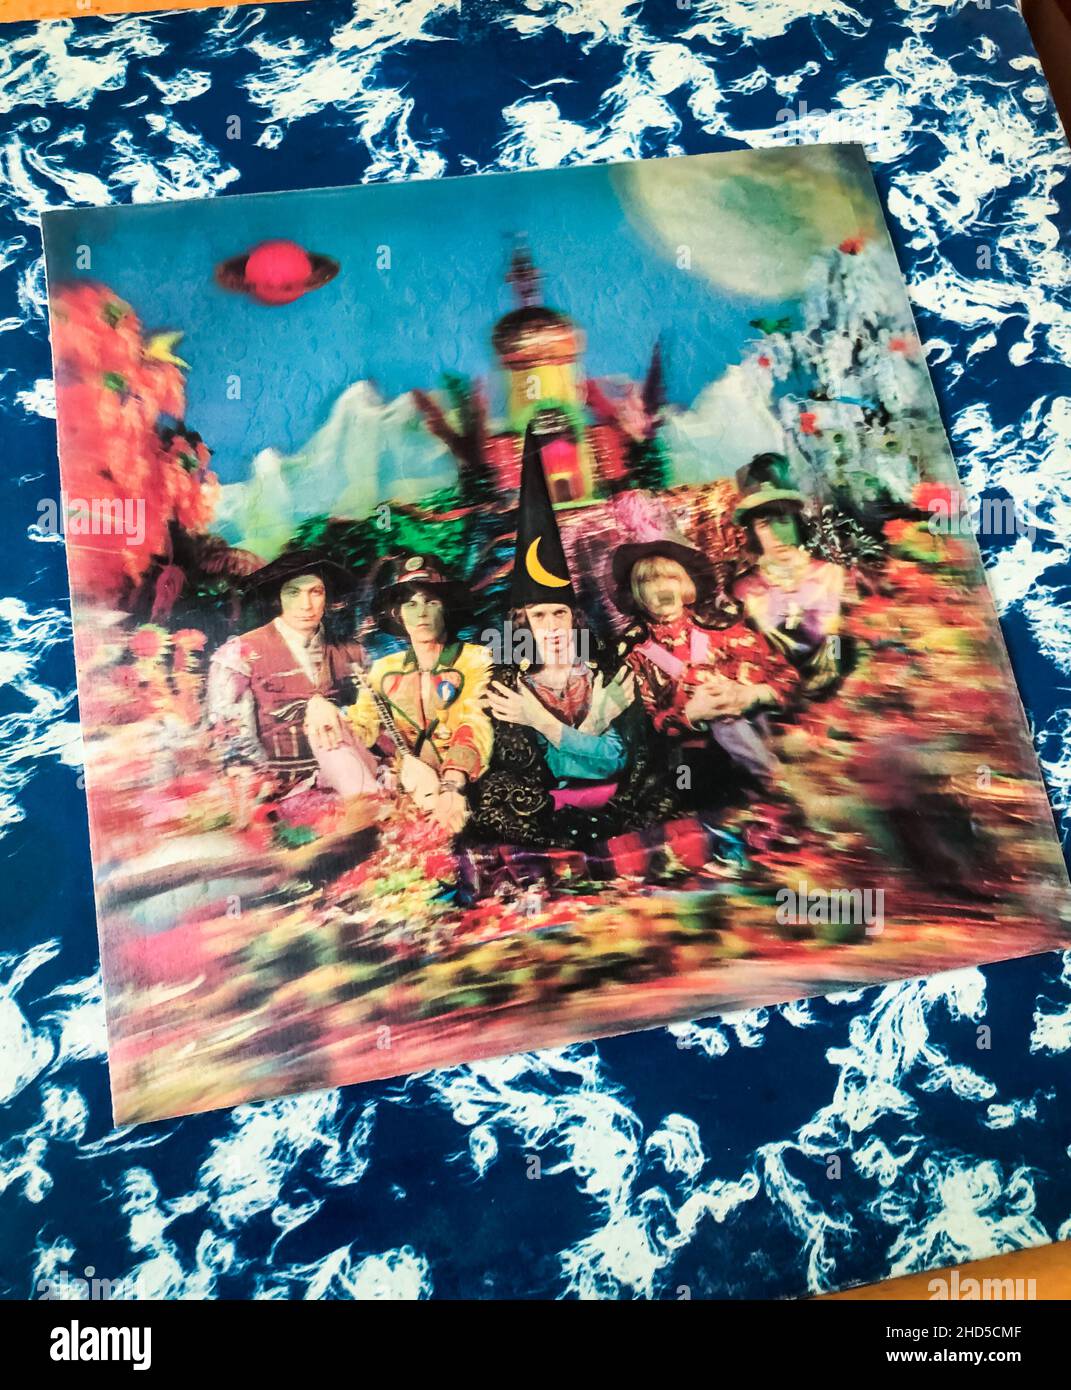 Rolling Stones Rock Music Anthology Album Cover, 1960s Psychedelic Artwork. classic rock vinyl albums, Rolling stones cover, vintage covers Stock Photo